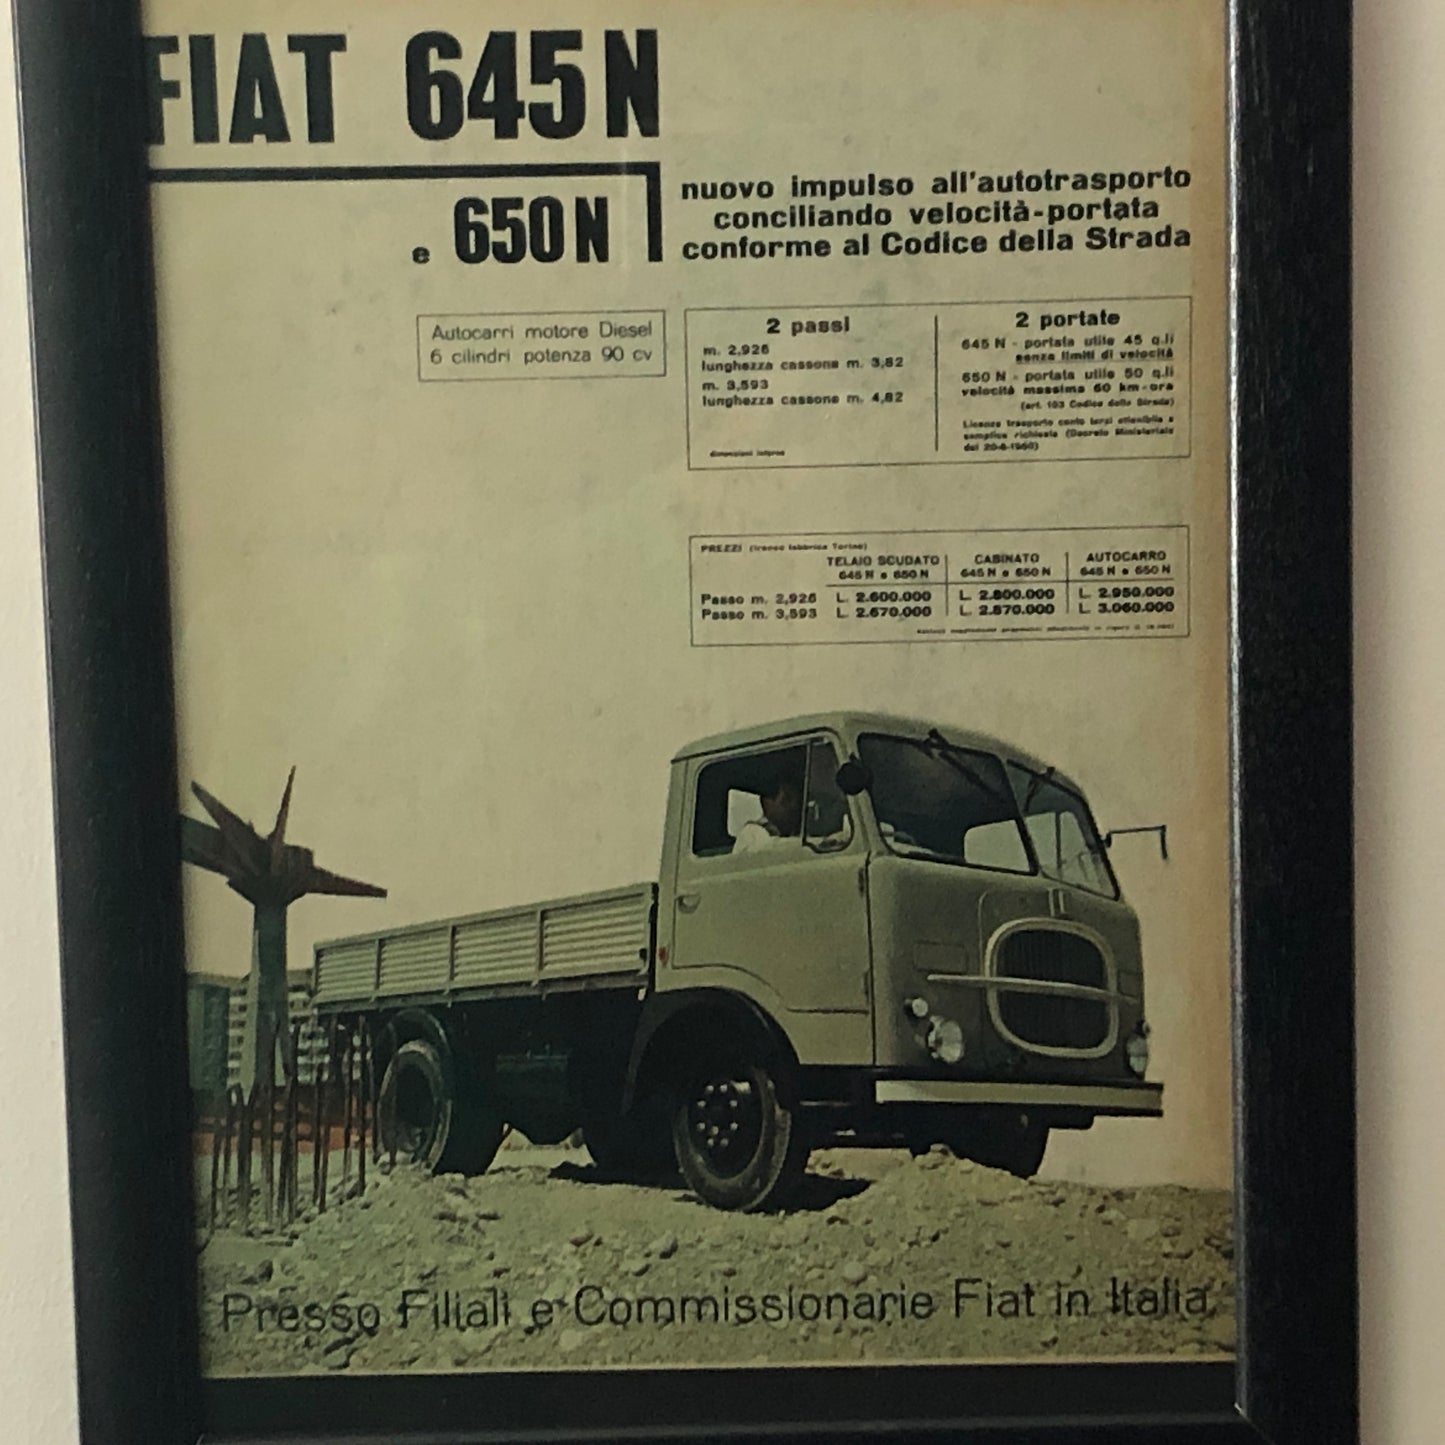 FIAT, 1960 FIAT 645 N and 650 N Advertisement with Italian Caption